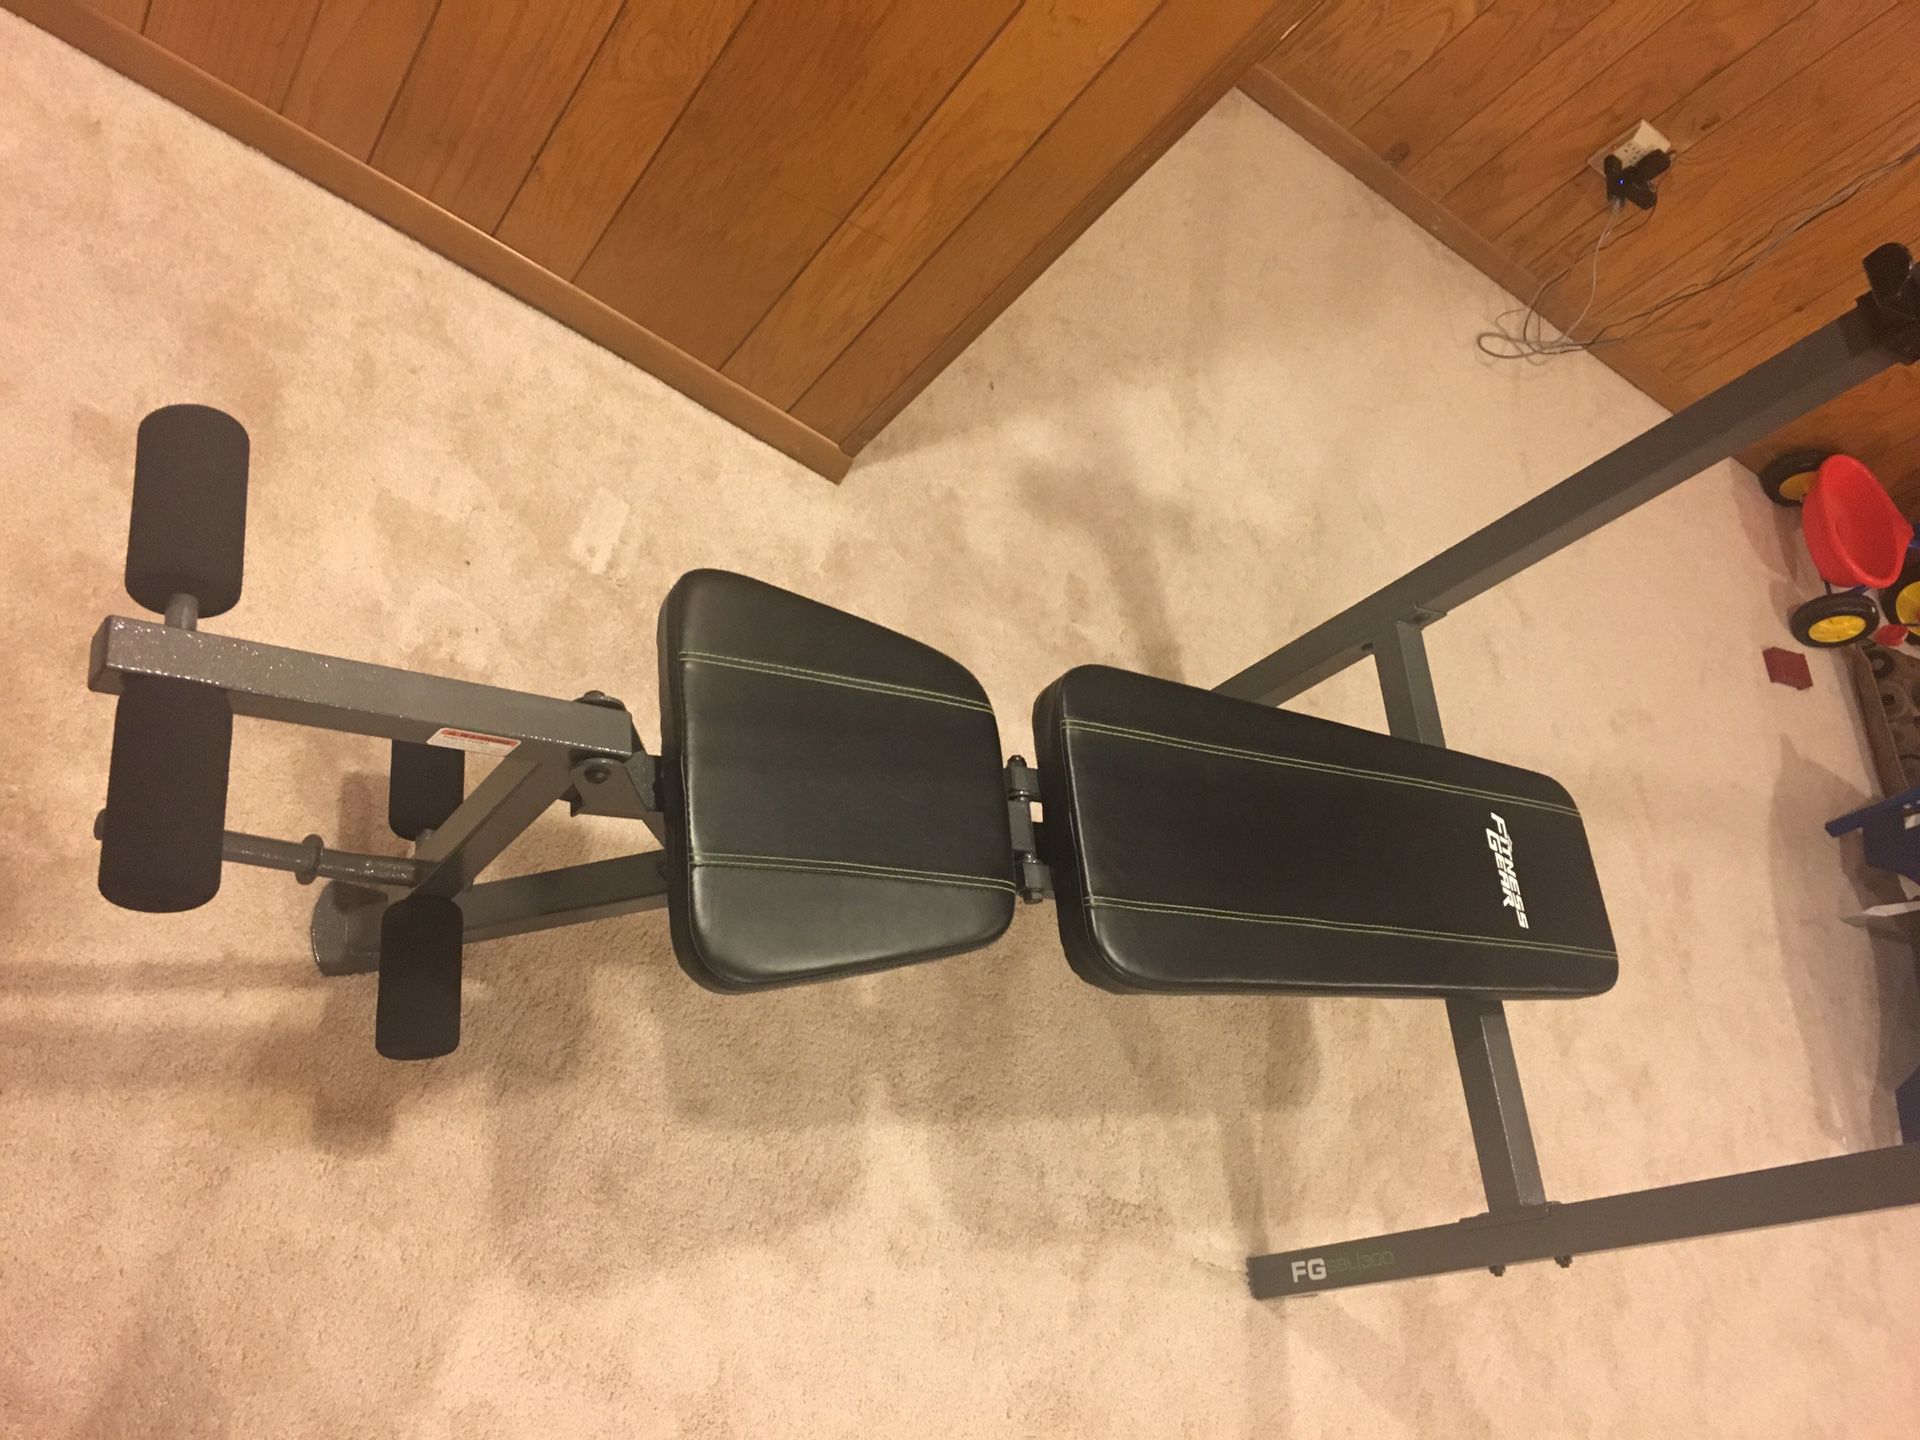 Work out equipment